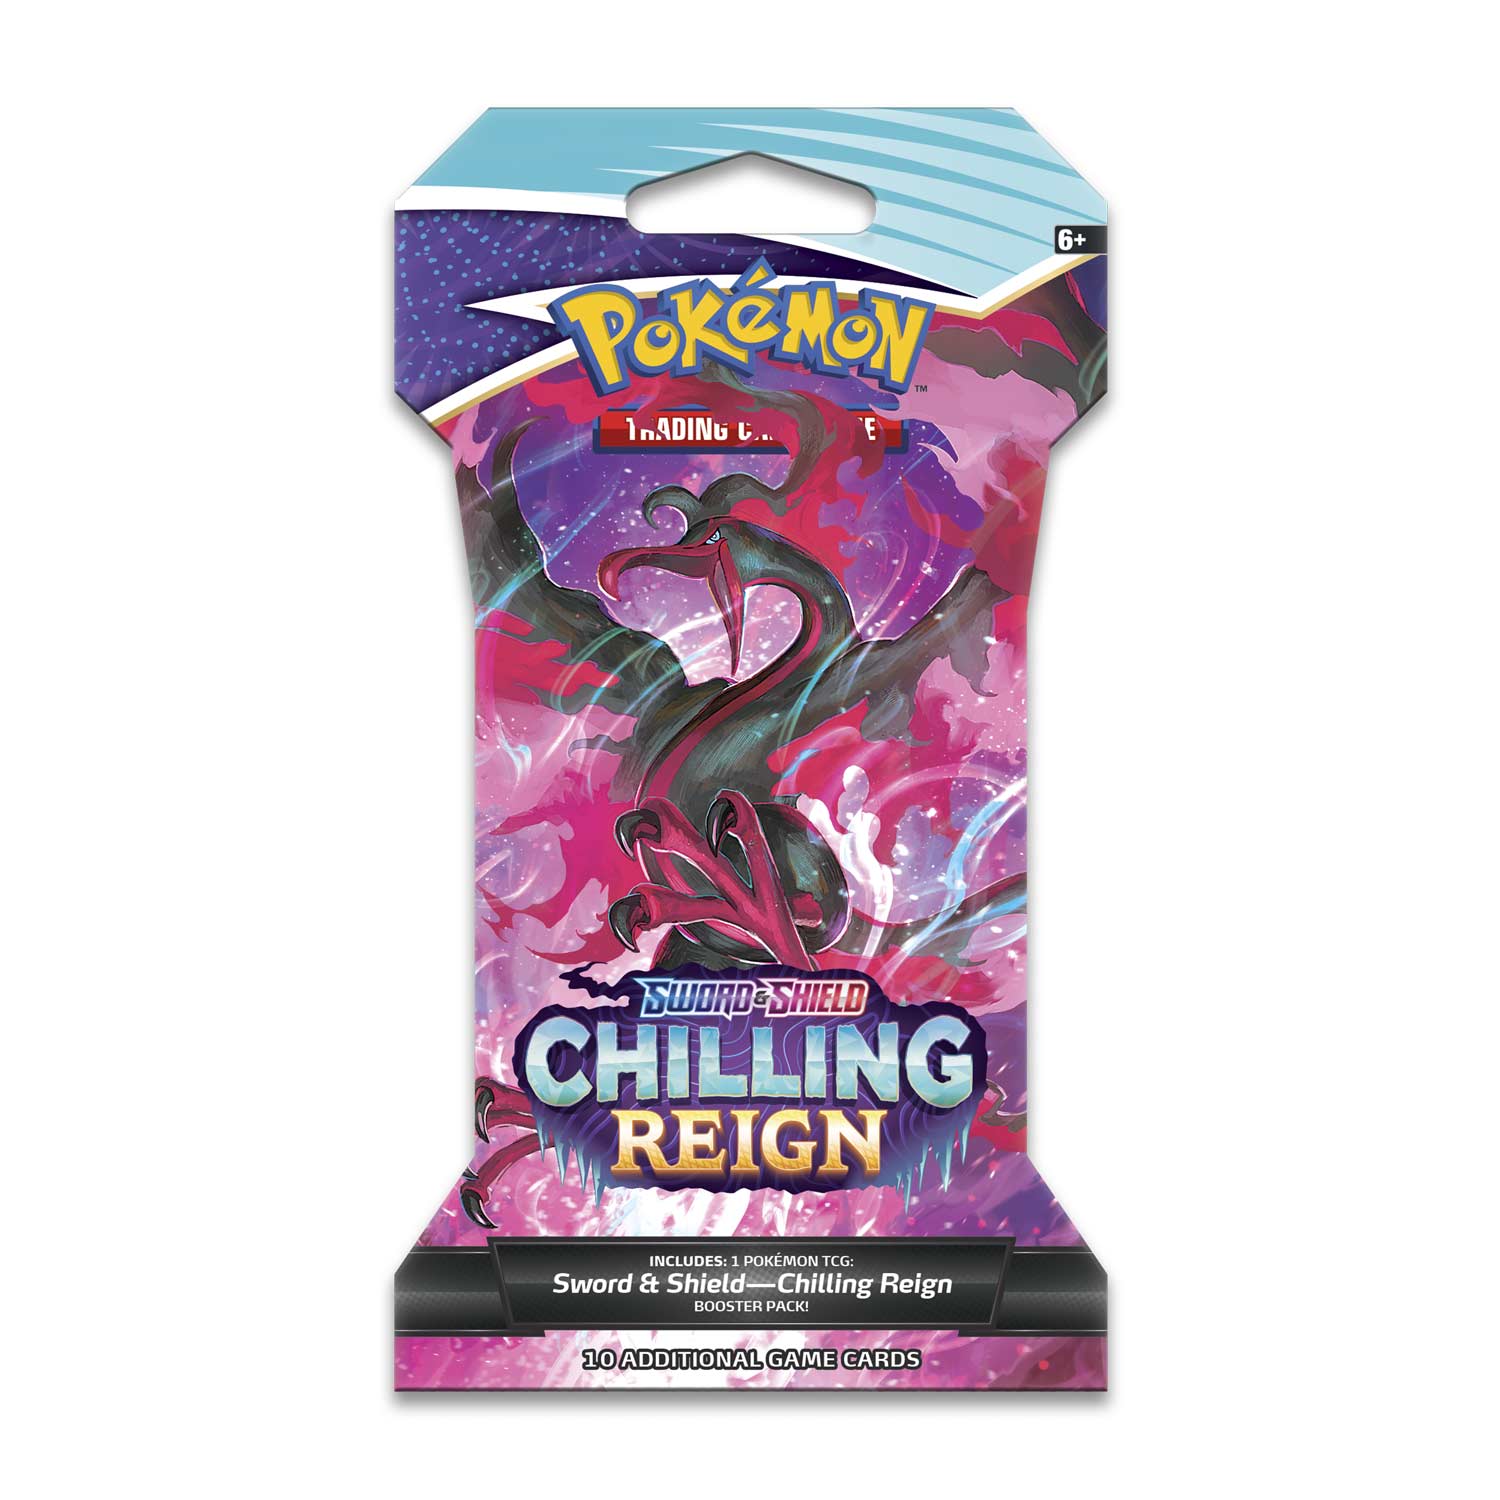 Pokémon - Chilling Reign Sleeved Booster